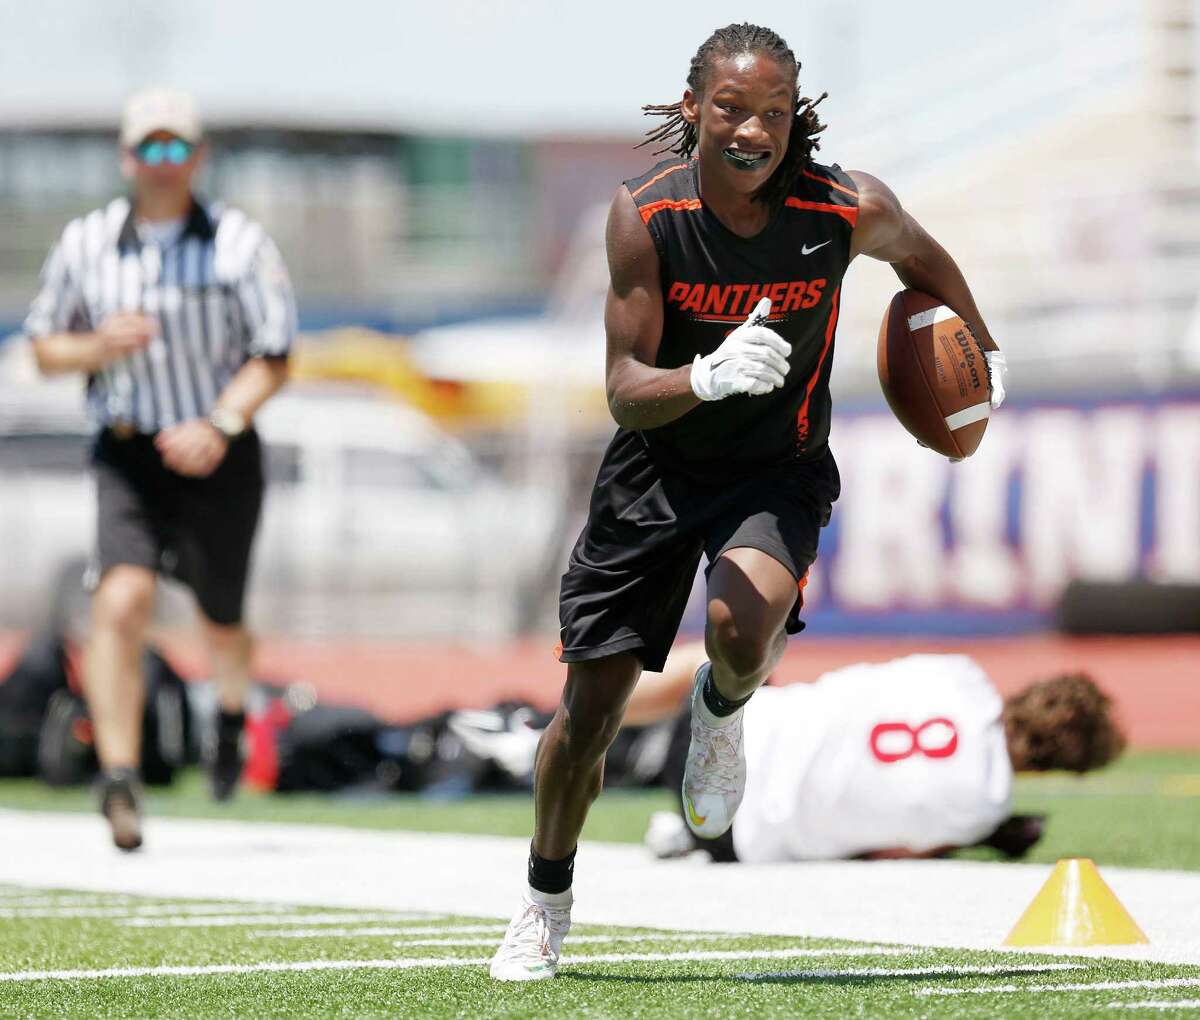 The growth of 7-on-7 football in the summer, St. Pius X receiver JJ Jefferson runs in the TAPPS title game, has impacted offenses around the state.